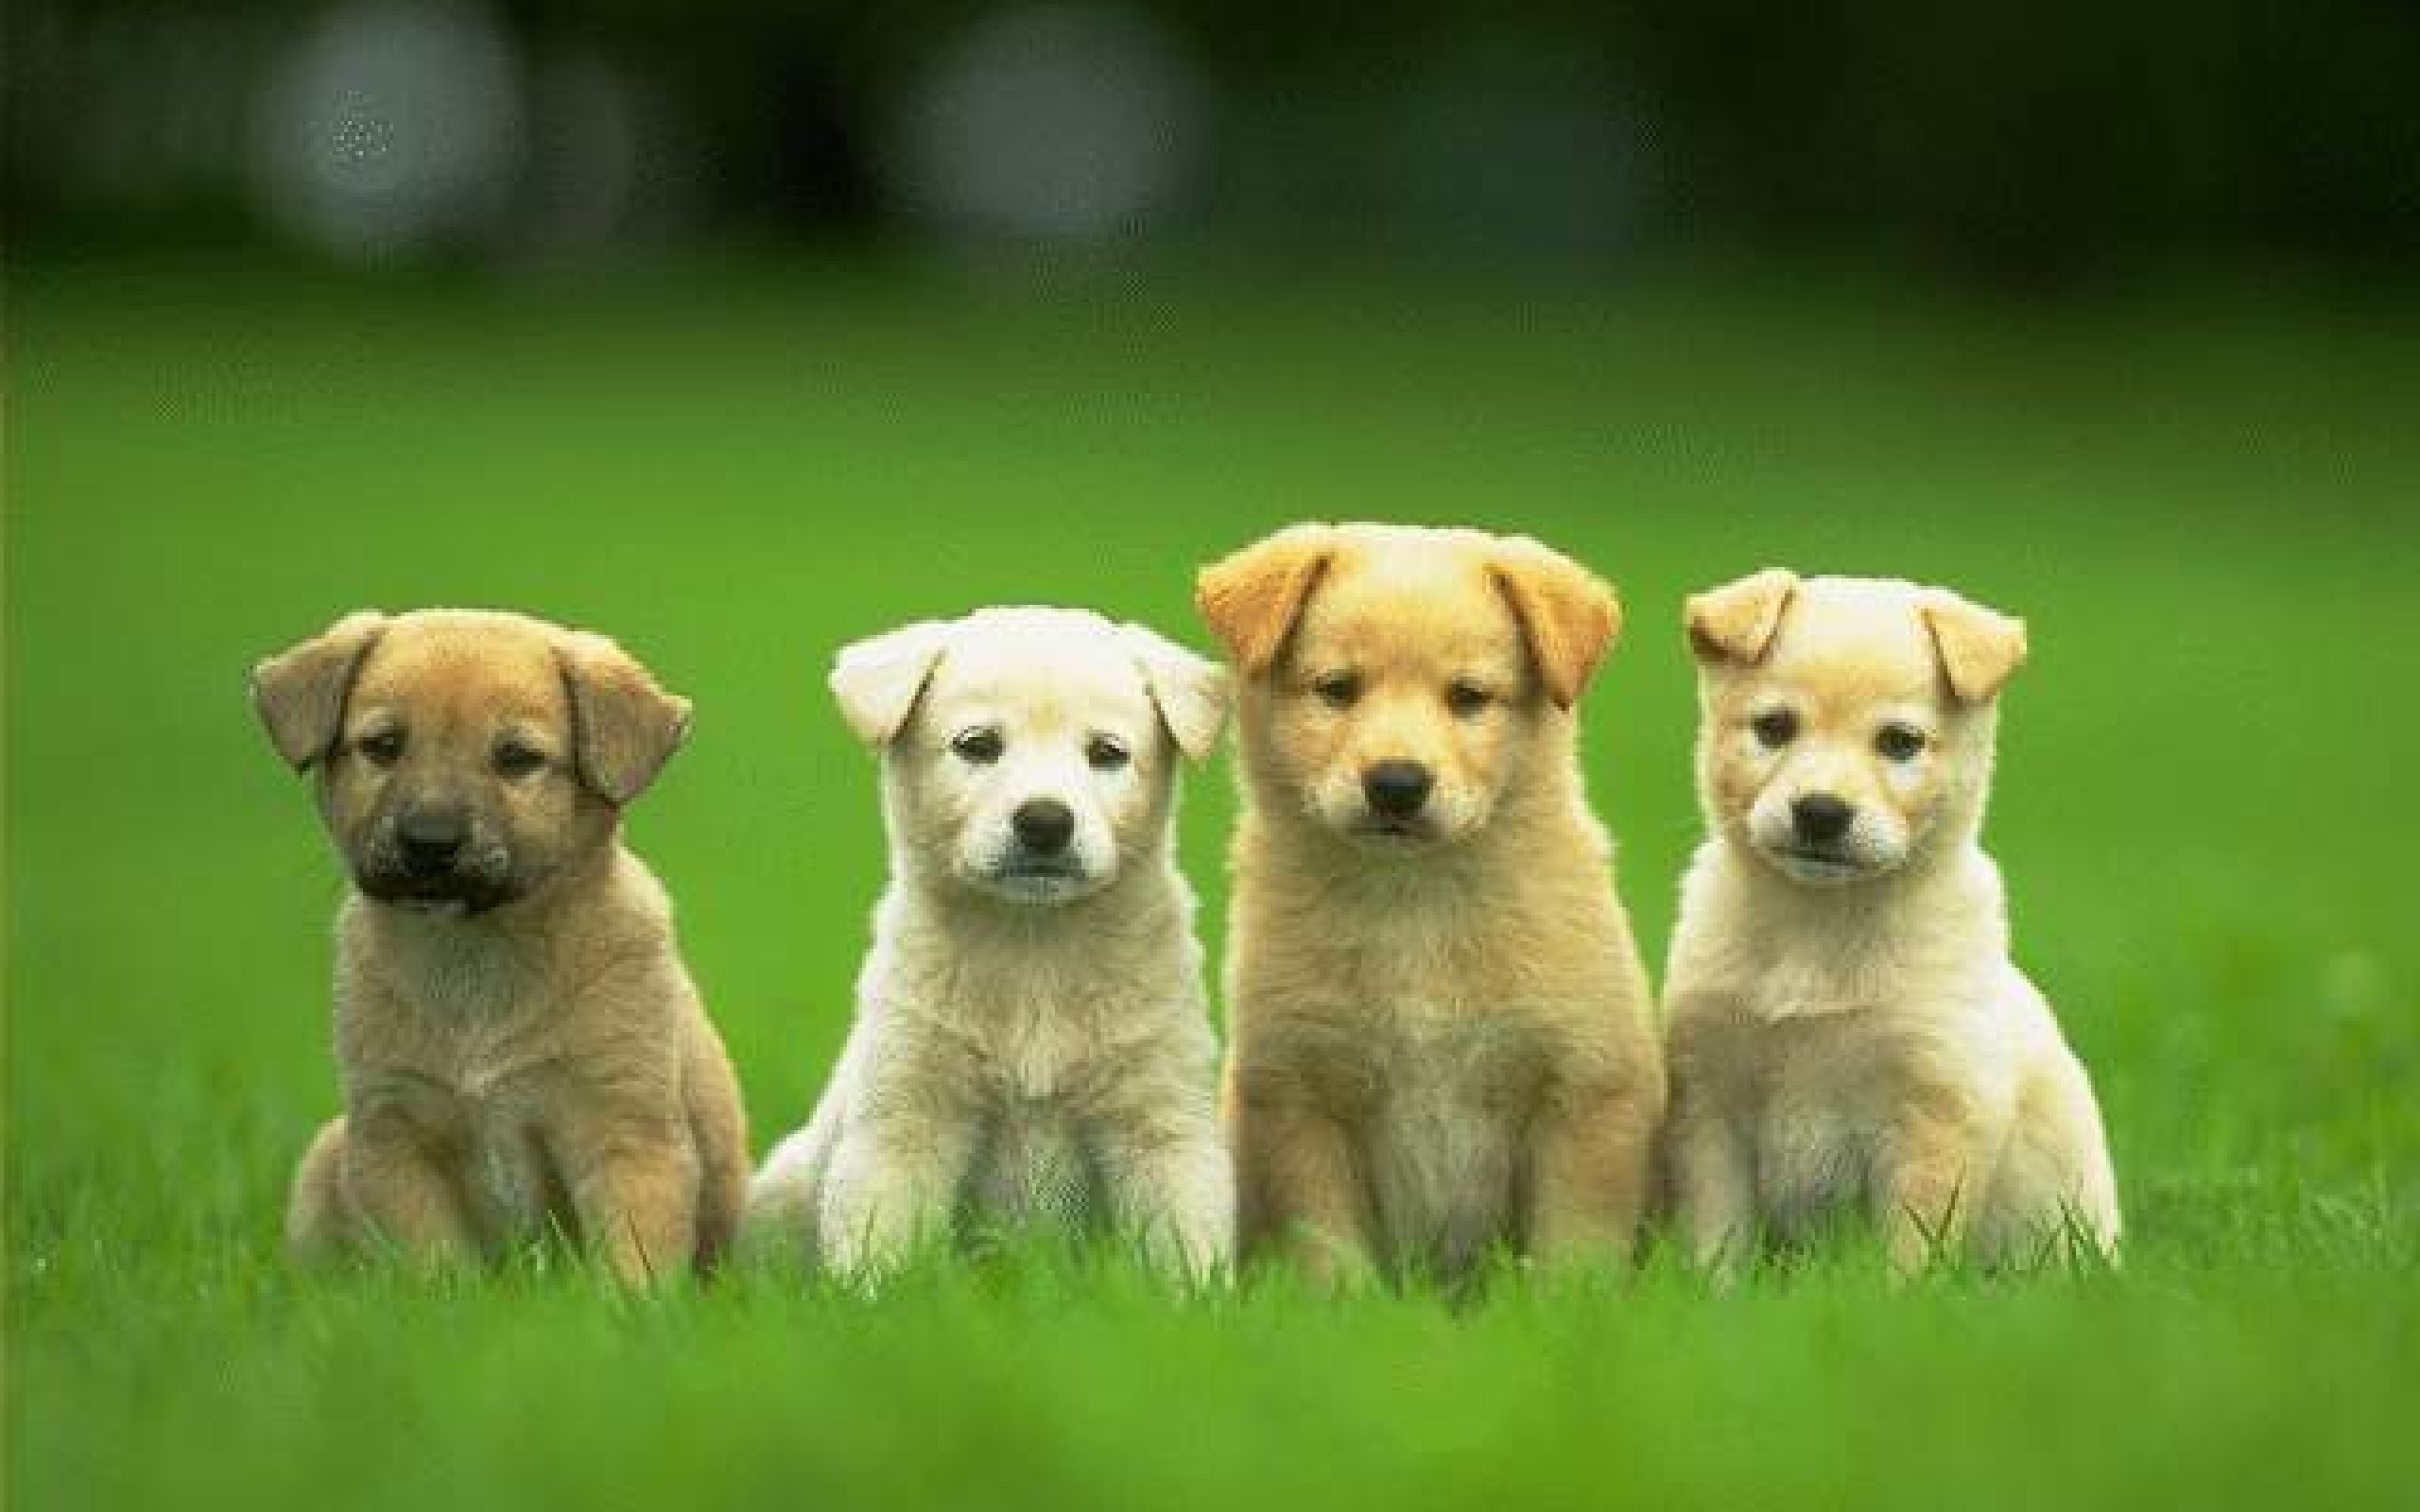 Desktop search images of dogs wallpaper